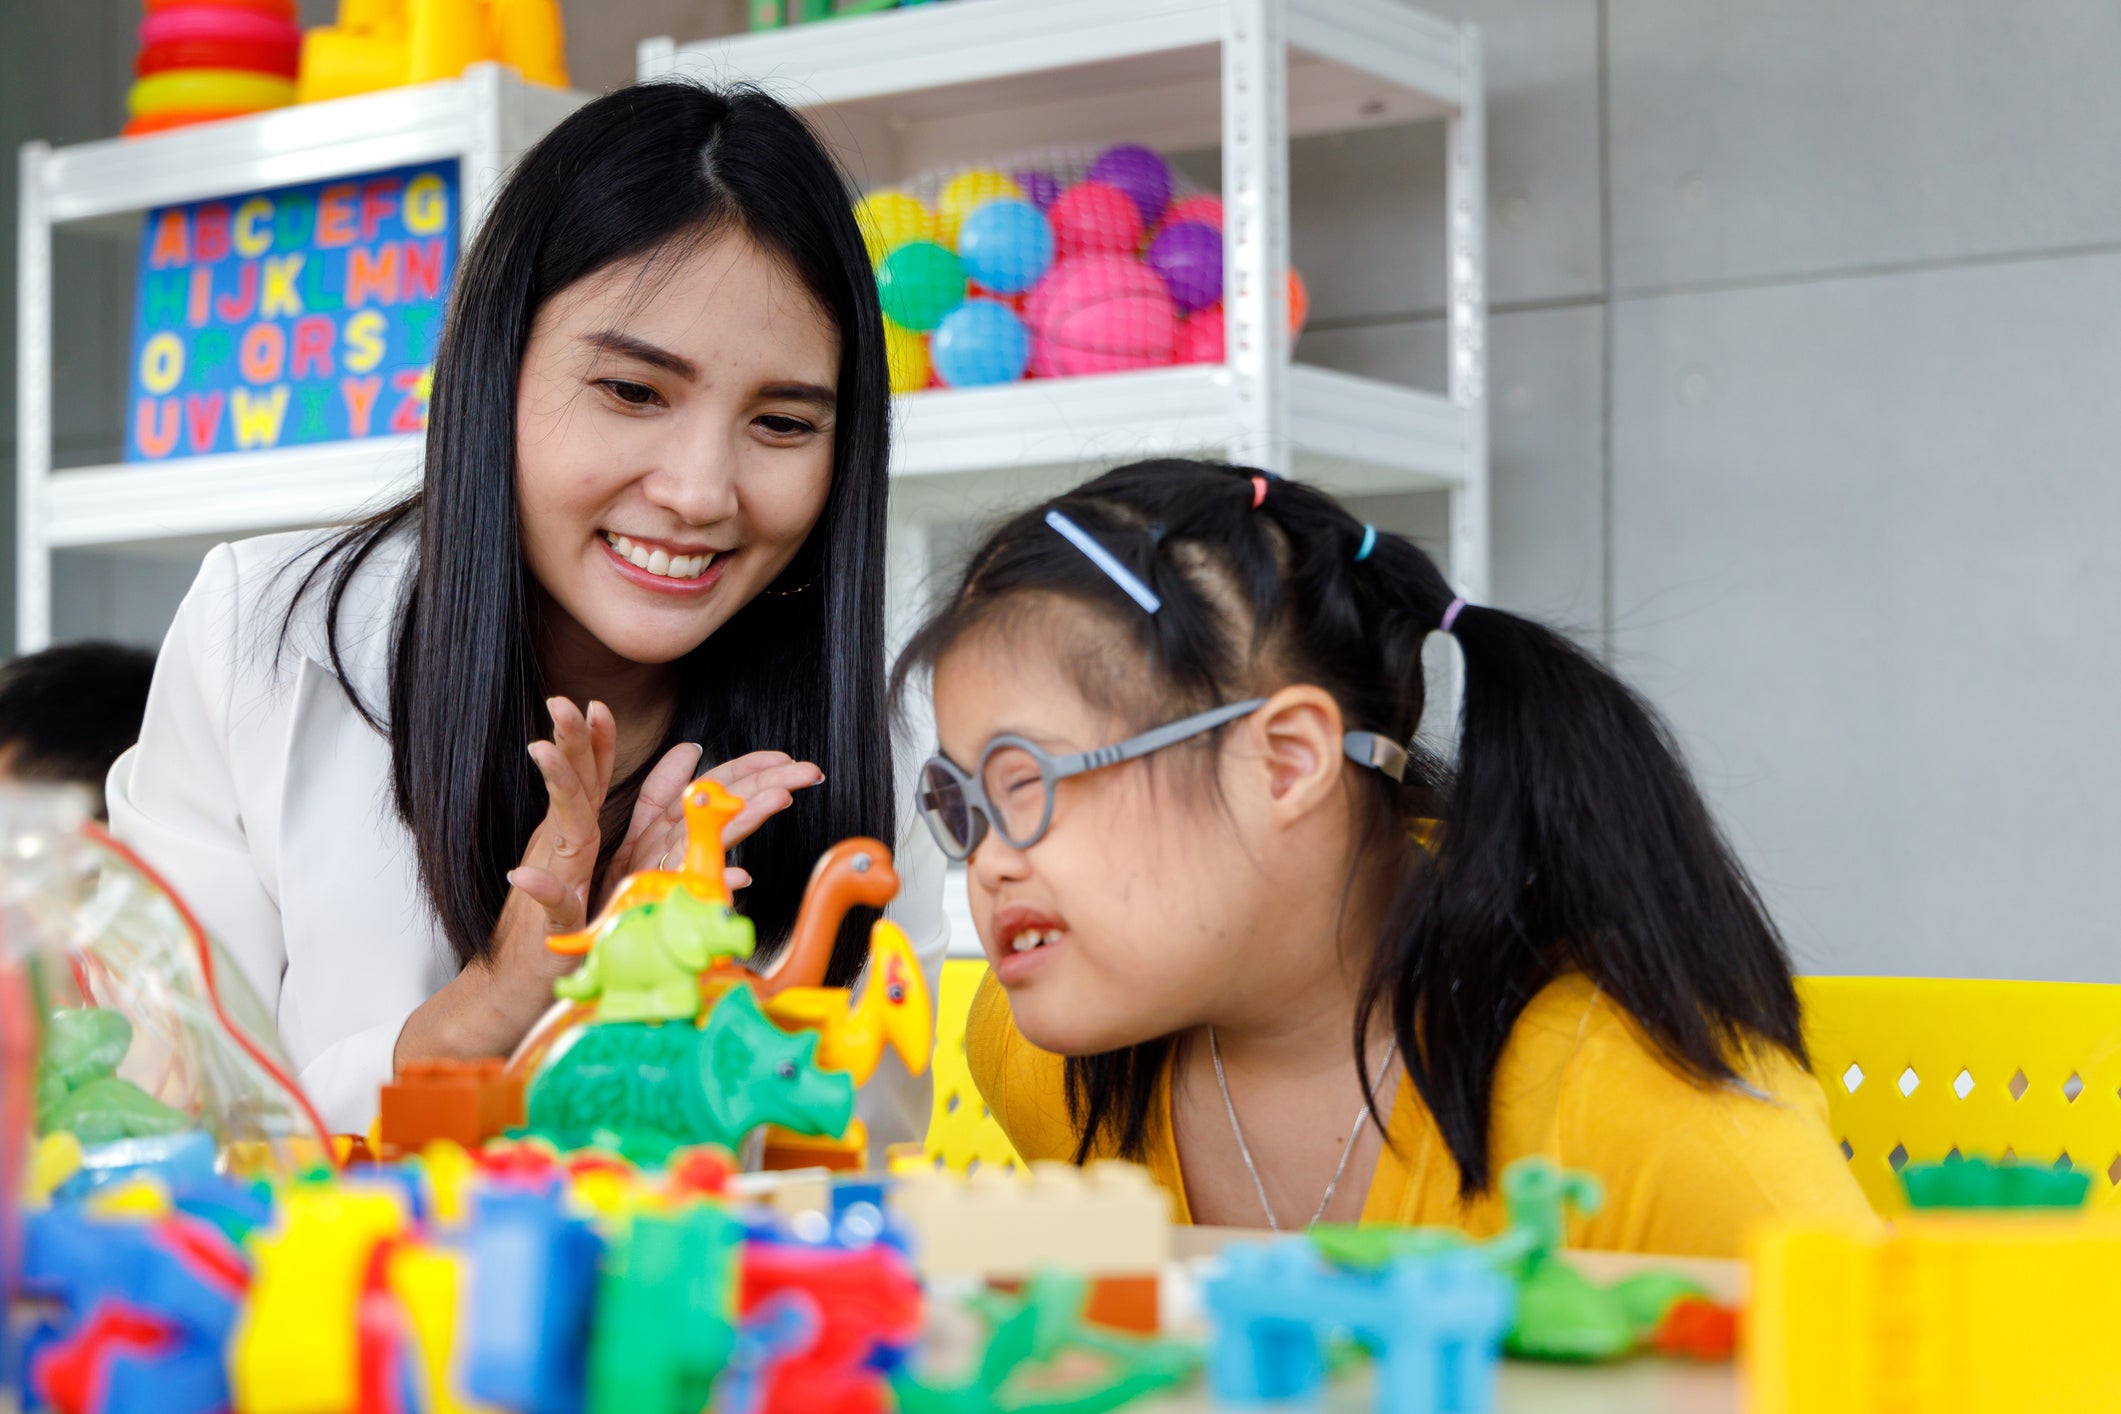 Smiling Asian woman in white blazer sitting with girl with Down's syndrome playing with colorful plastic dinosaur toy.